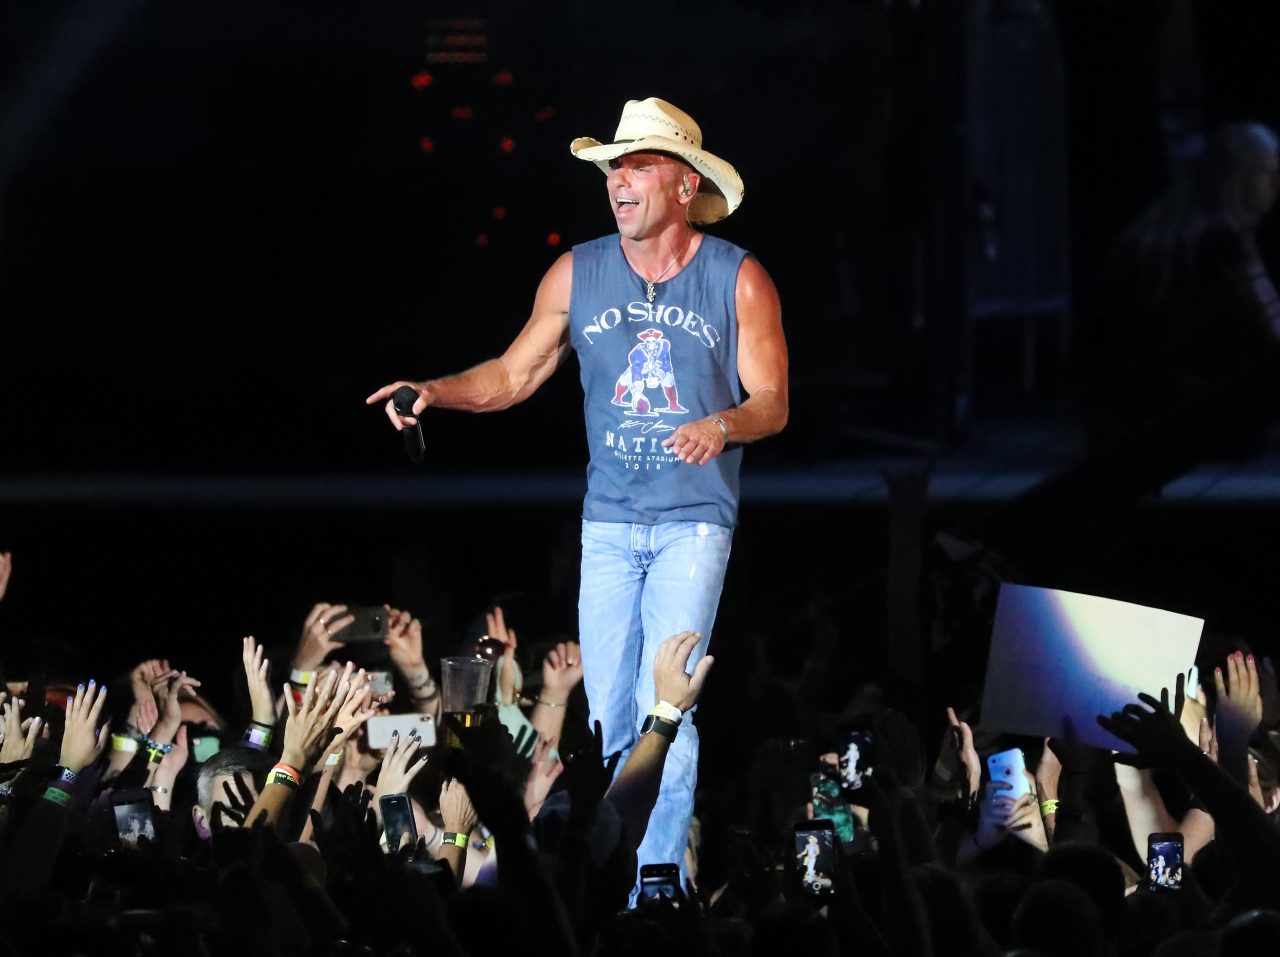 Kenny Chesney Makes 2022 Stadium Tour Official After Years of Waiting